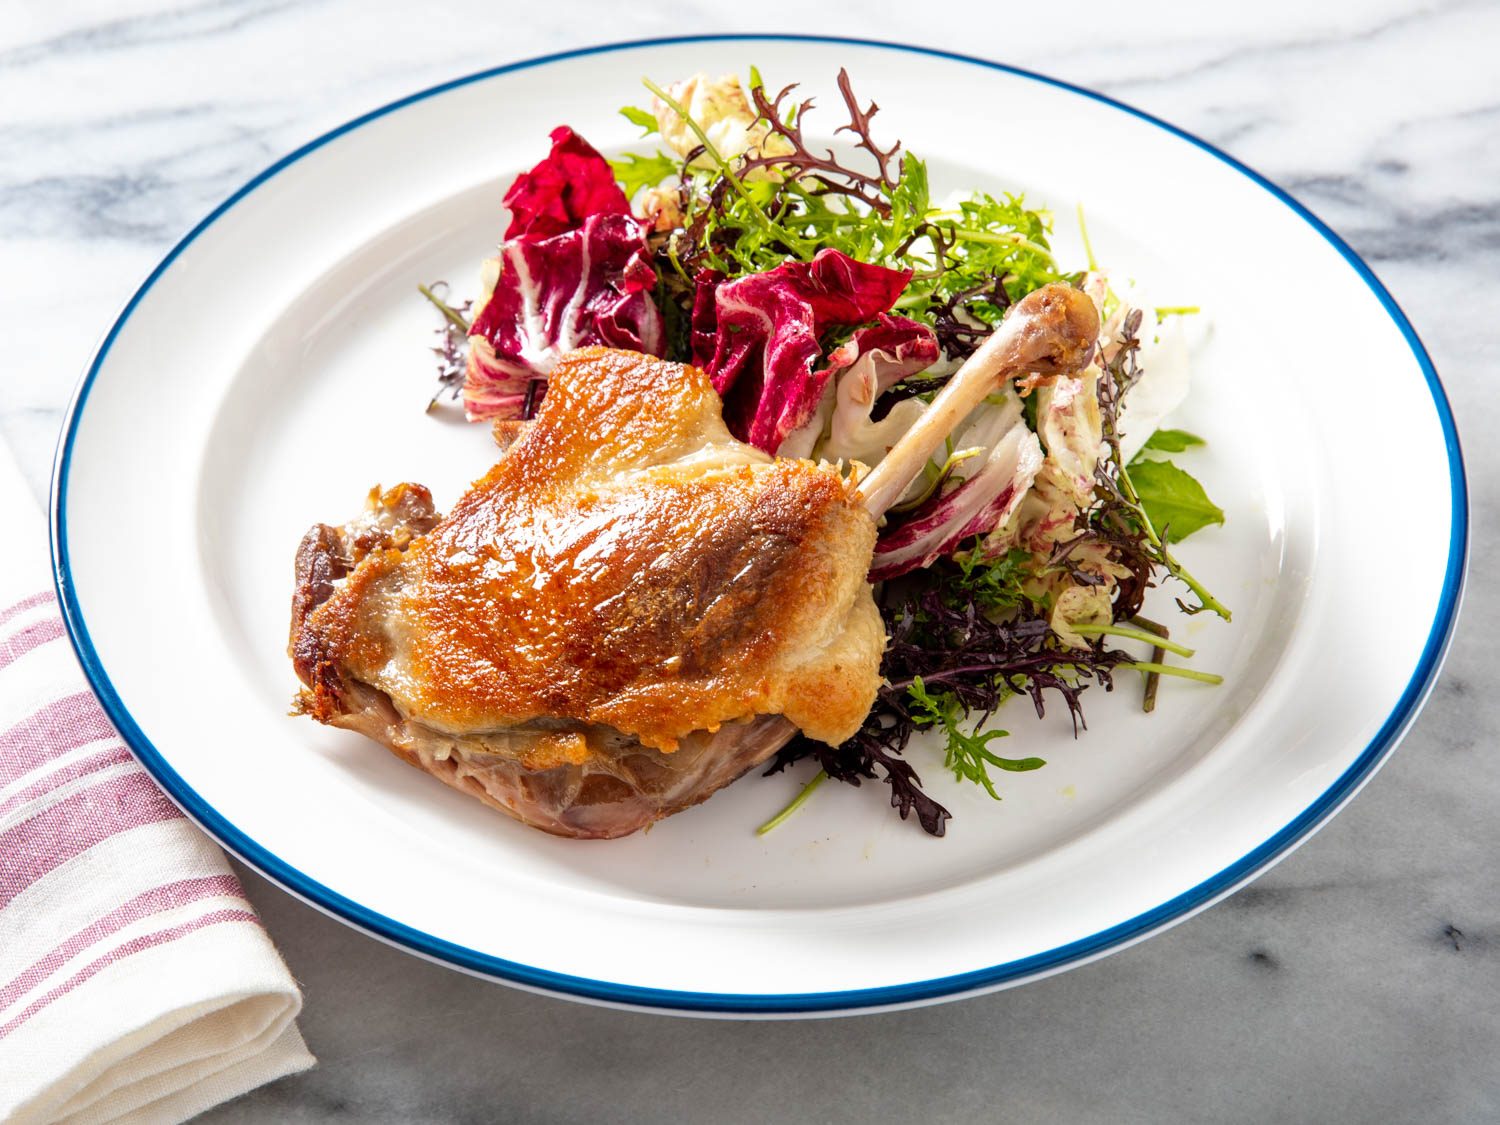 🍴 If You’ve Tried 18/27 of These Foods, You’re a Sophisticated Eater Crispy Duck Confit